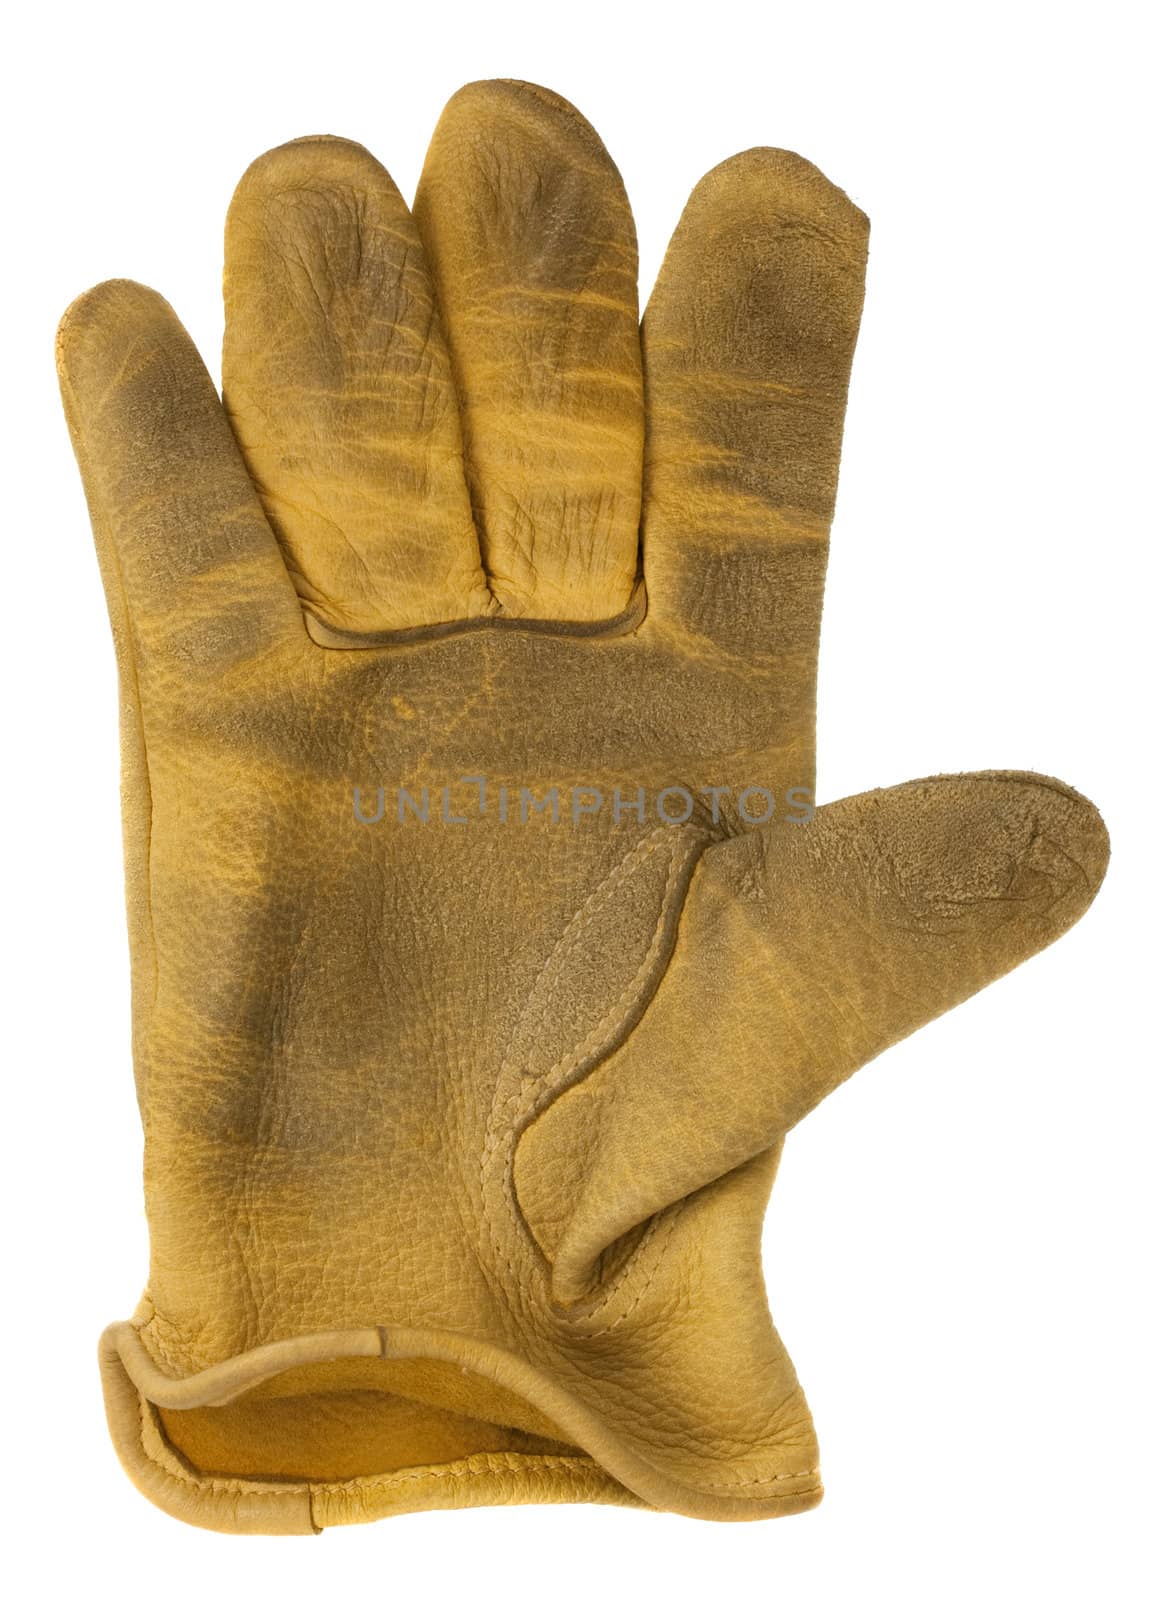 worn out, yellow deer leather, right hand glove, isolated on white